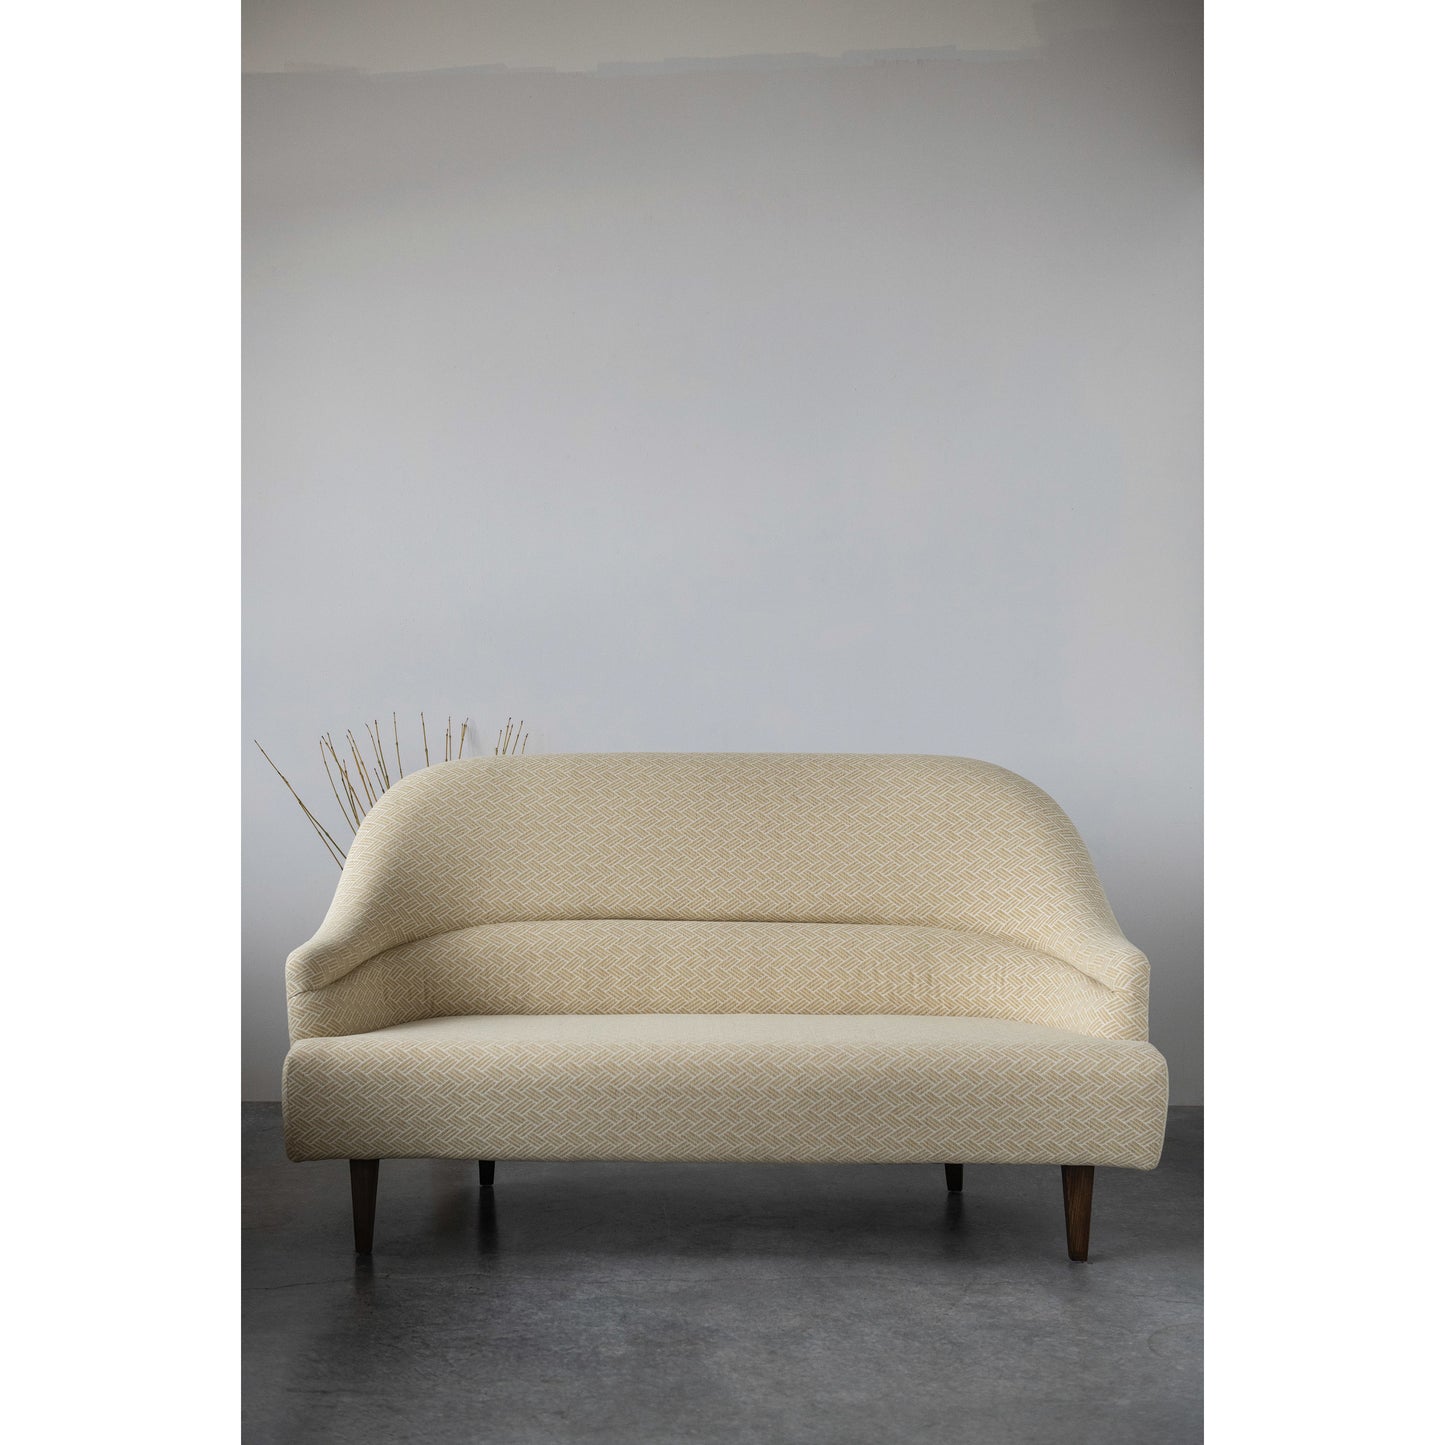 Furniture Penalynn Sofa (Shipping not included).